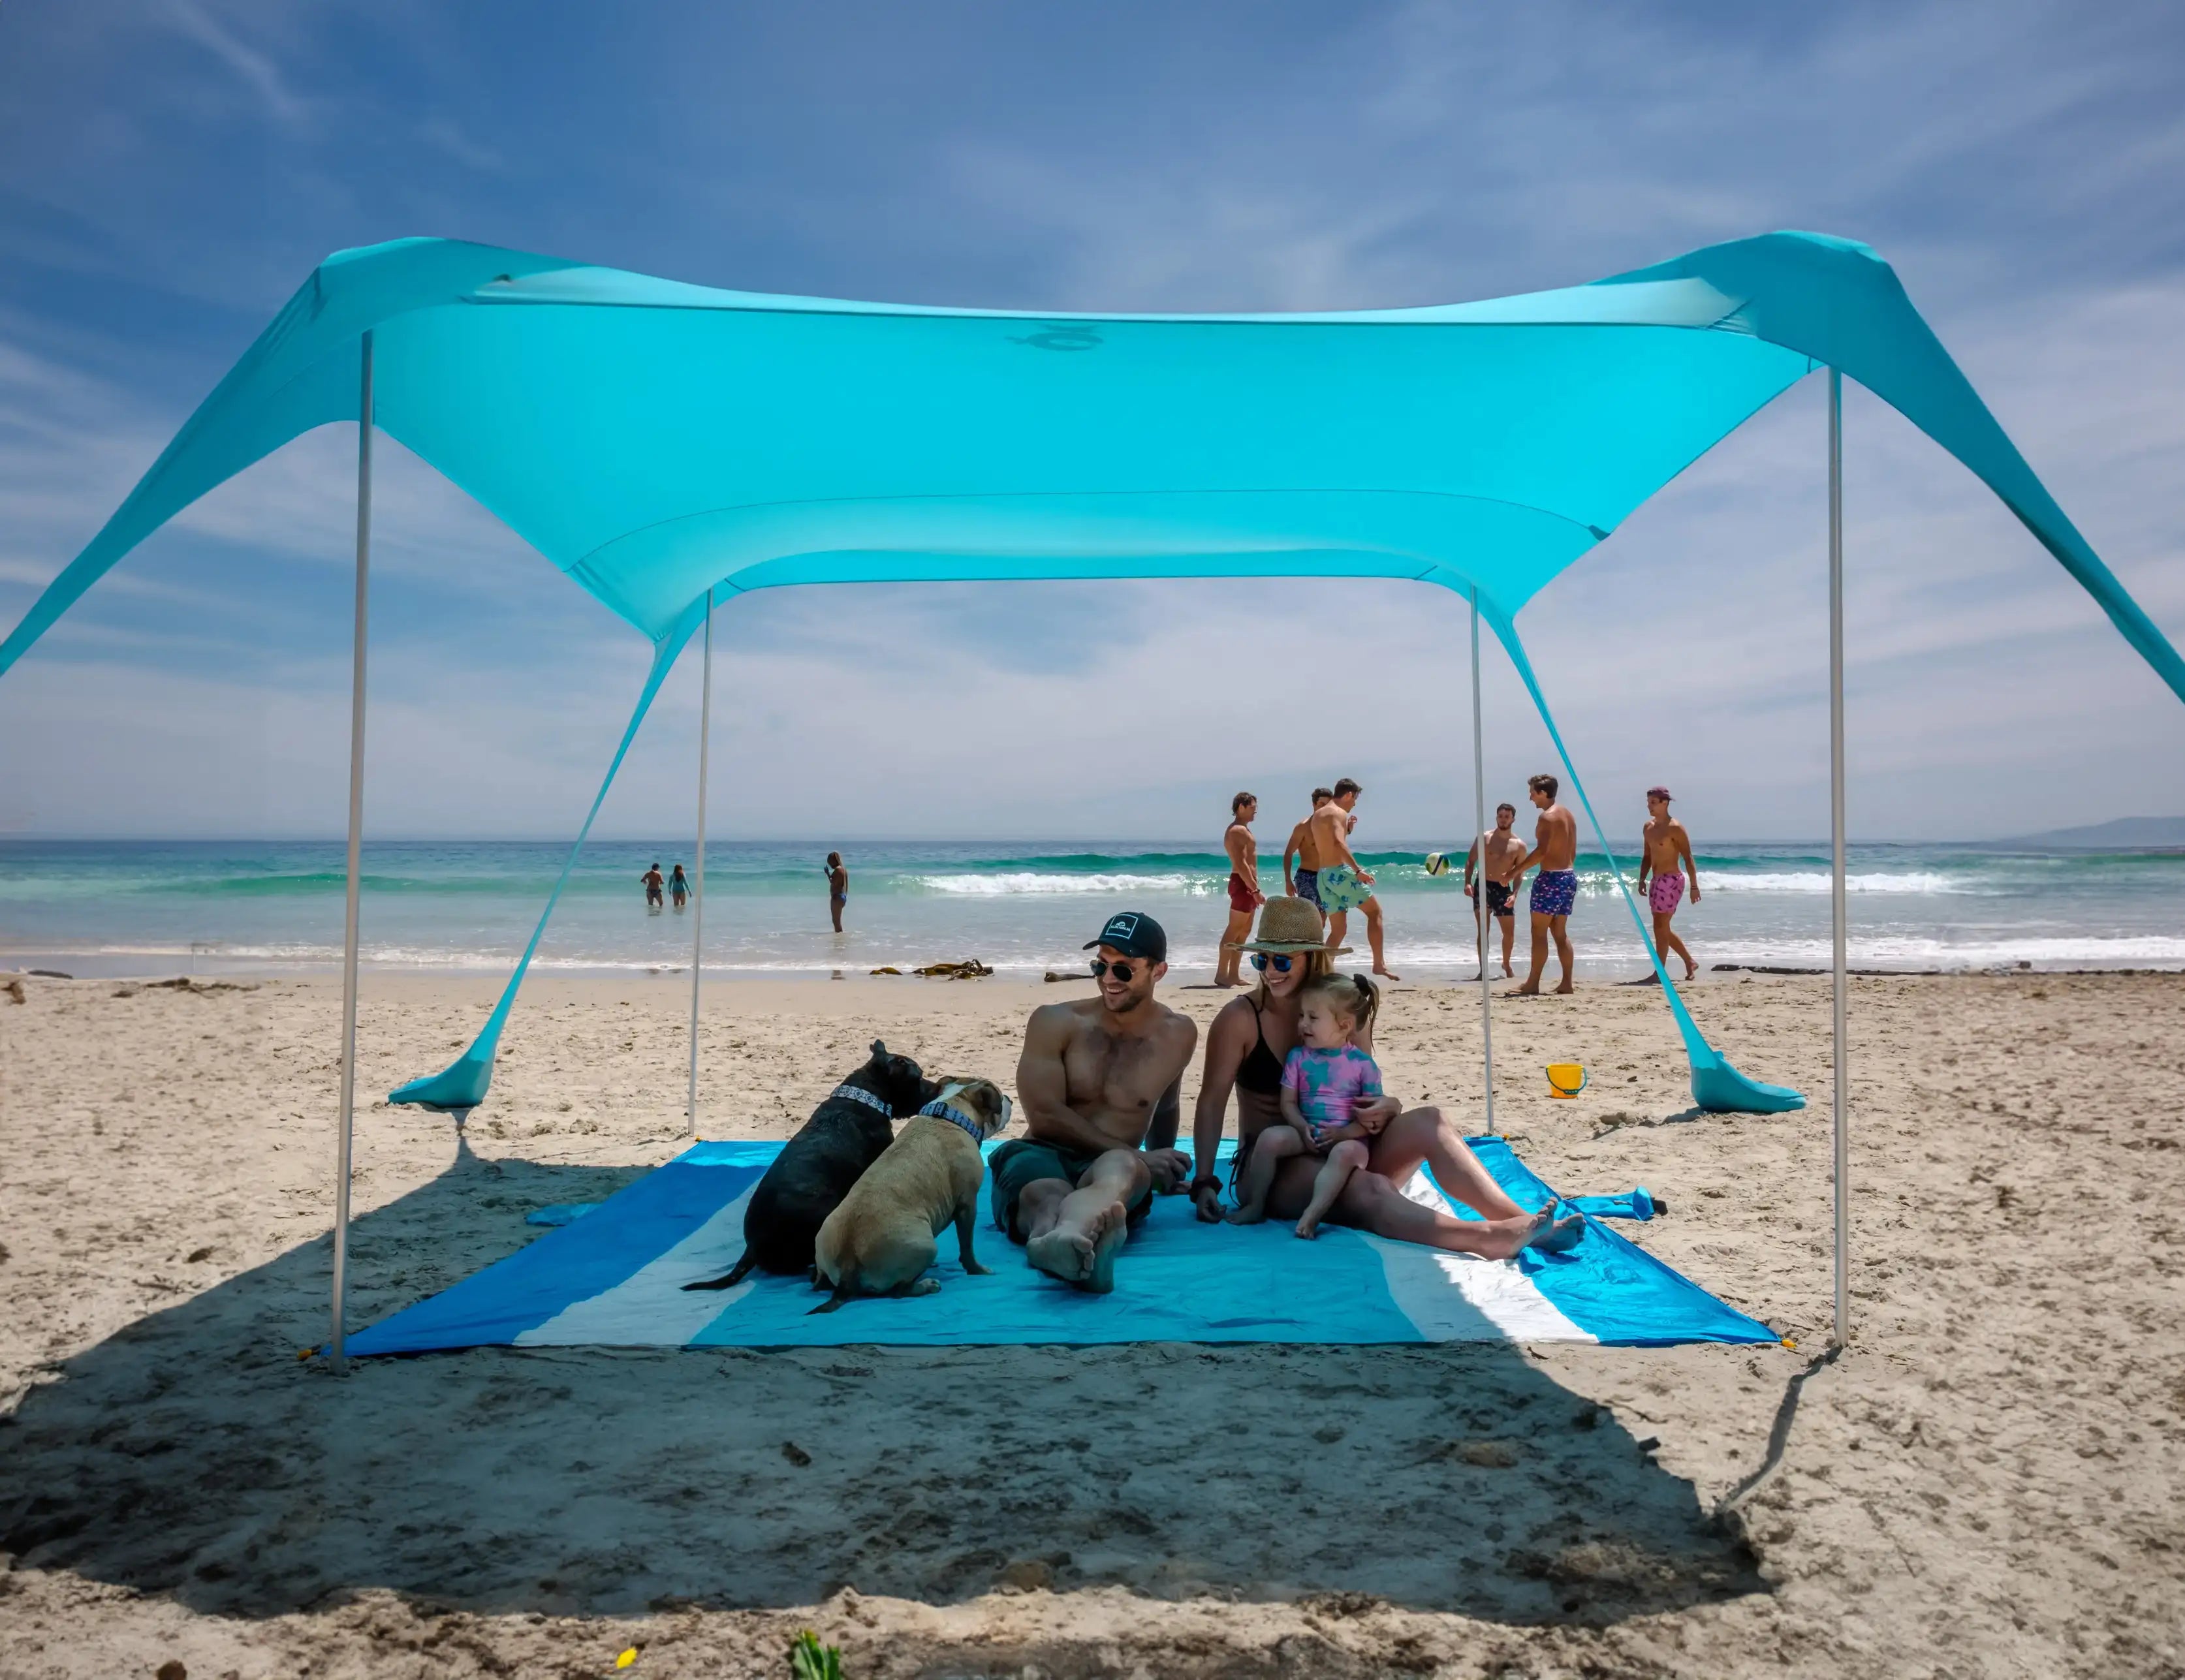 SUN NINJA Up Beach Tent Sun Shelter UPF50+ with Sand Shovel, Ground Pegs  and Stability Poles, Outdoor Shade